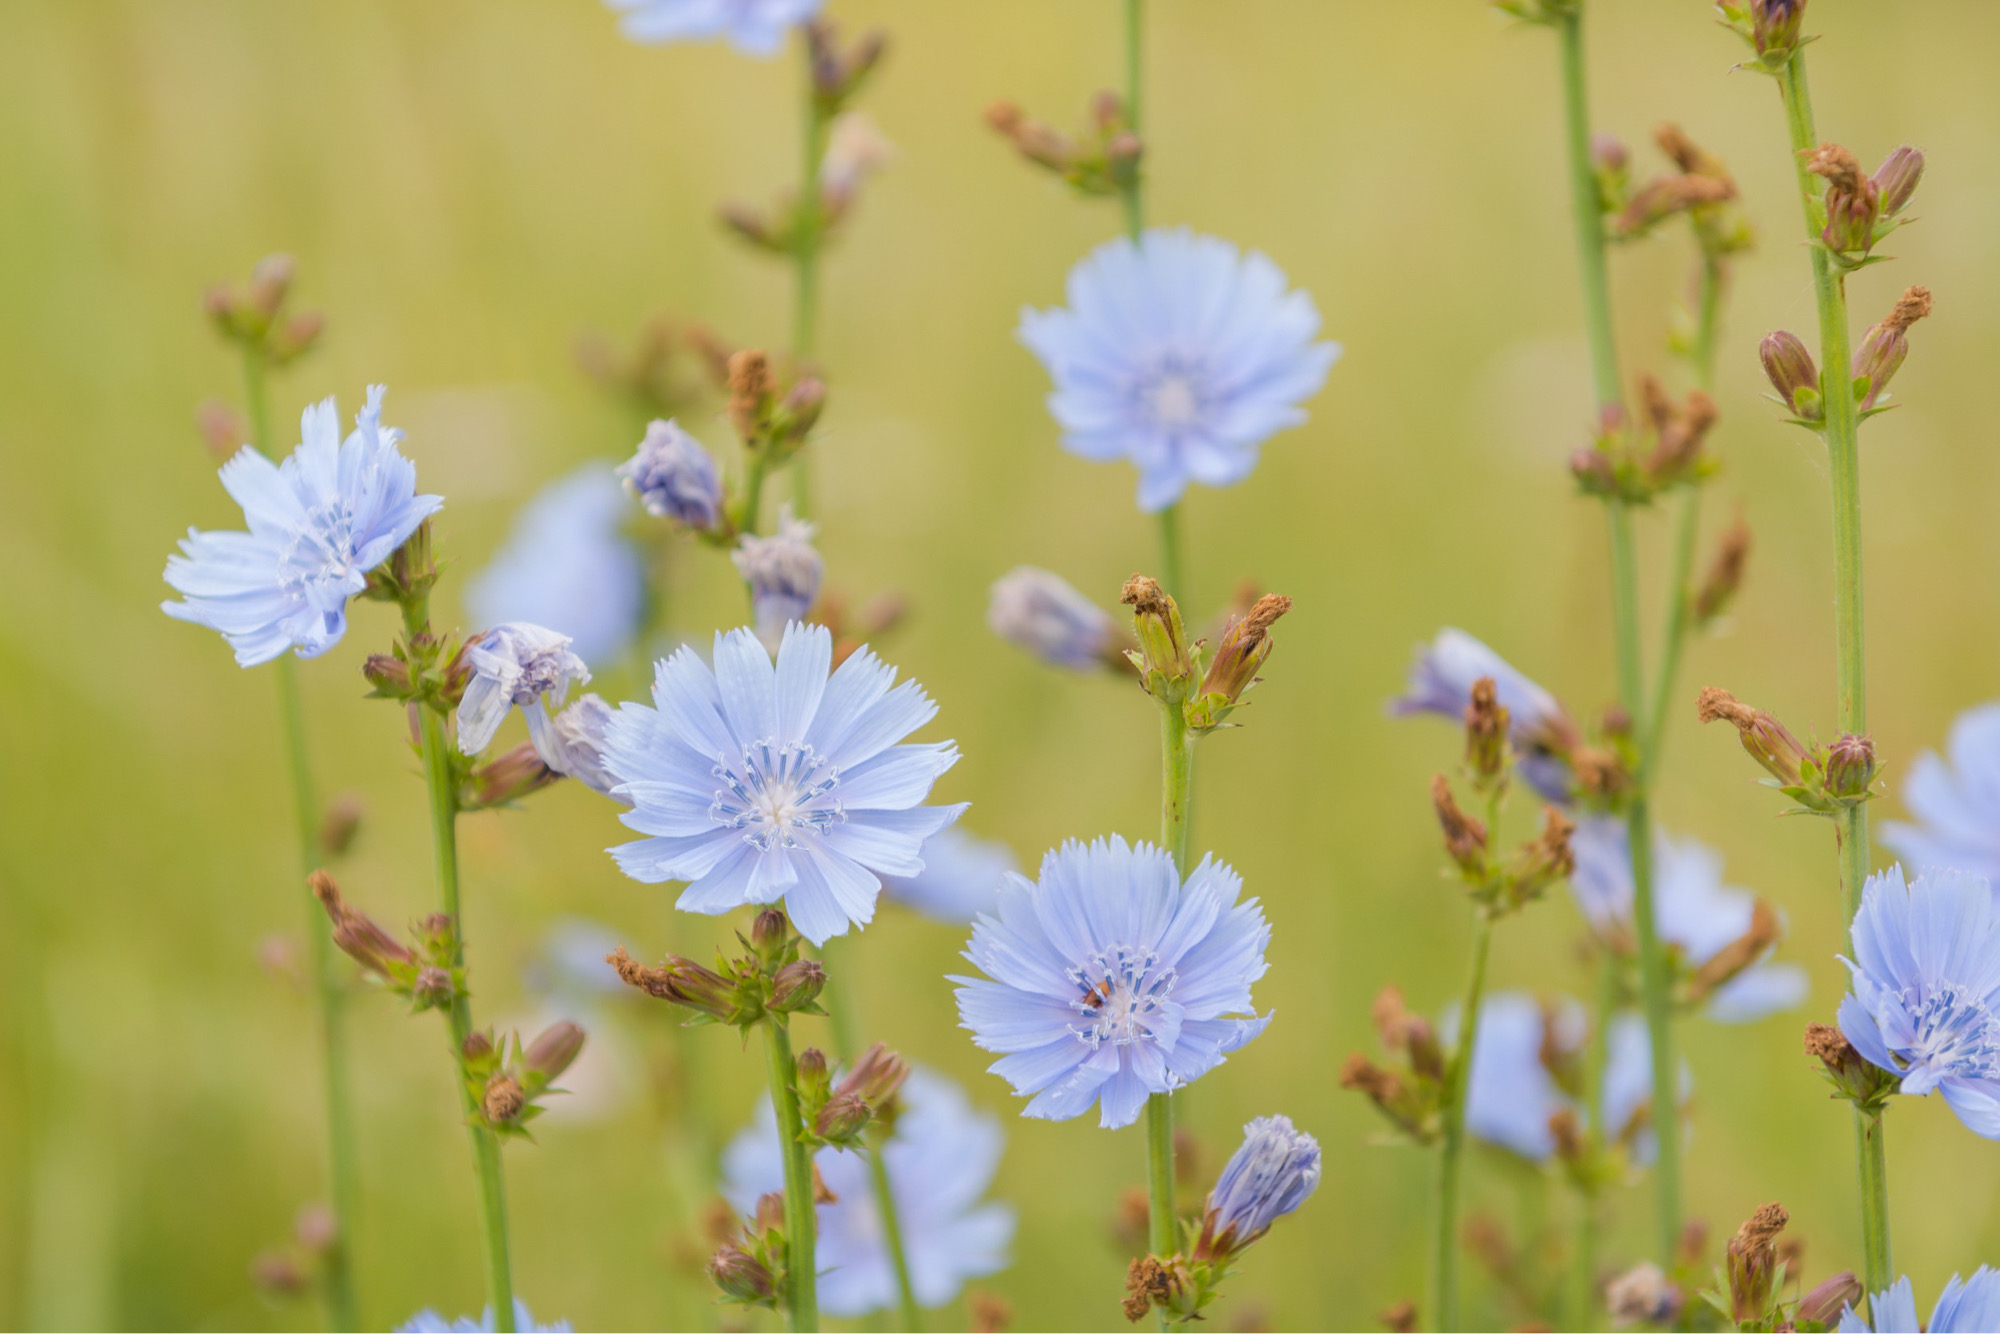 Chicory flowers and stems growing in a grassy field